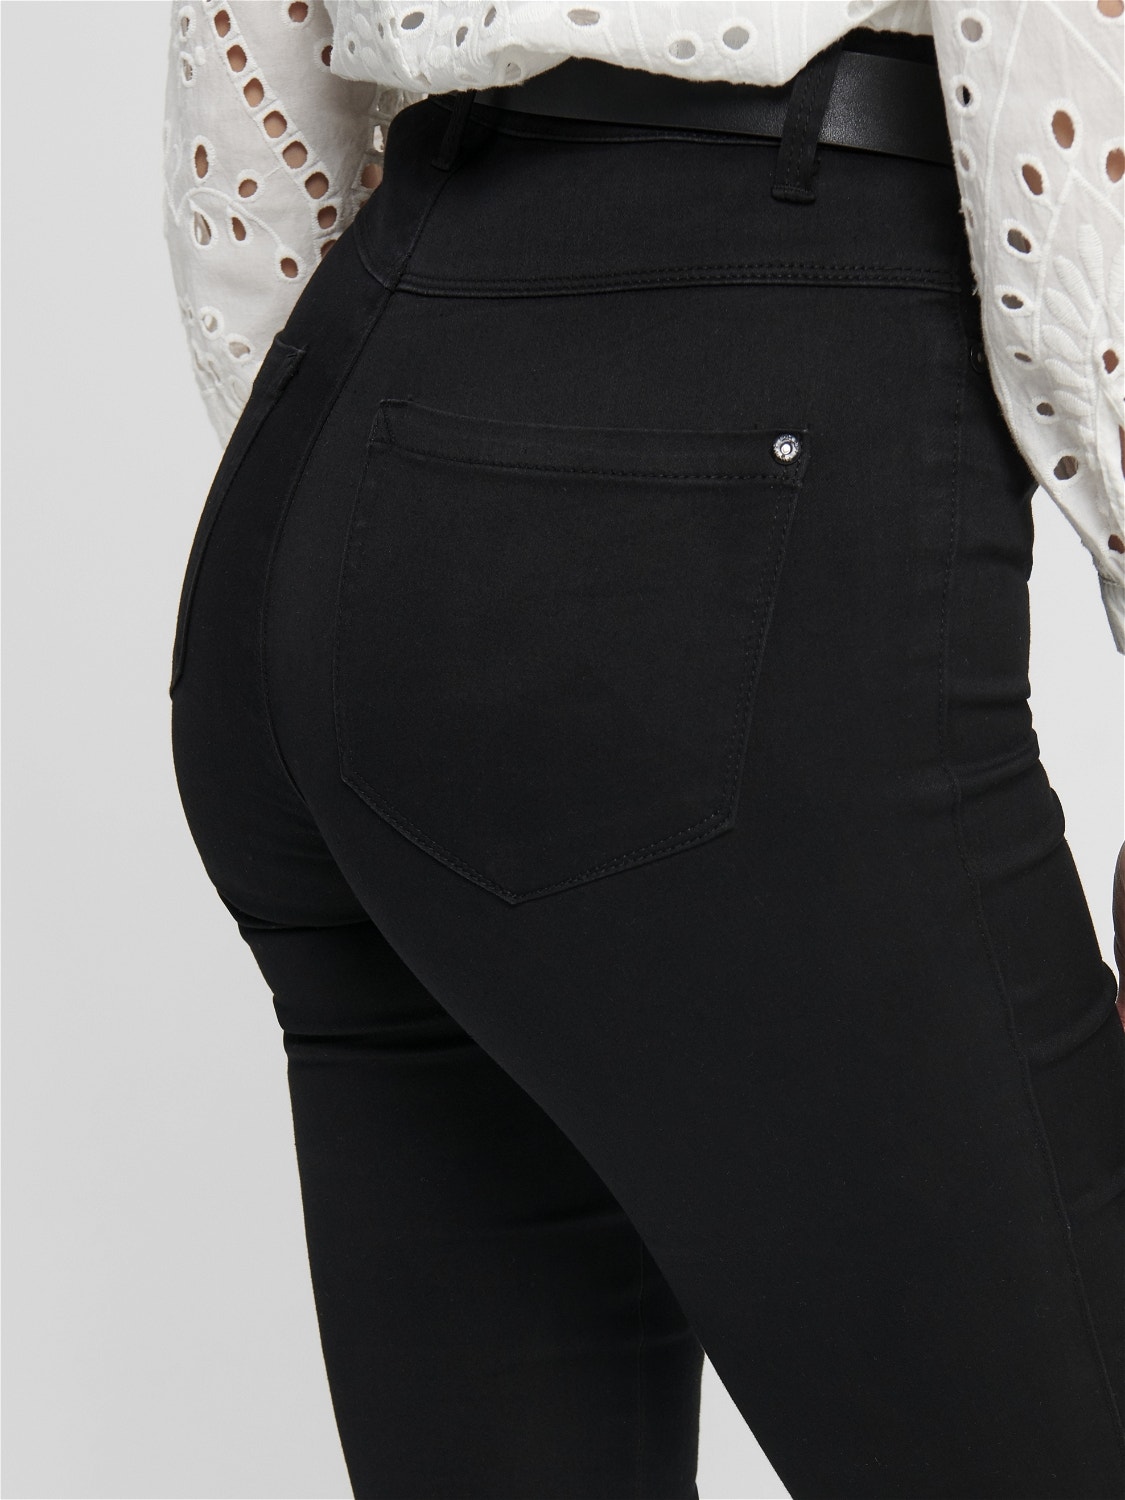 ONLY Skinny fit High waist Jeans -Black - 15093134